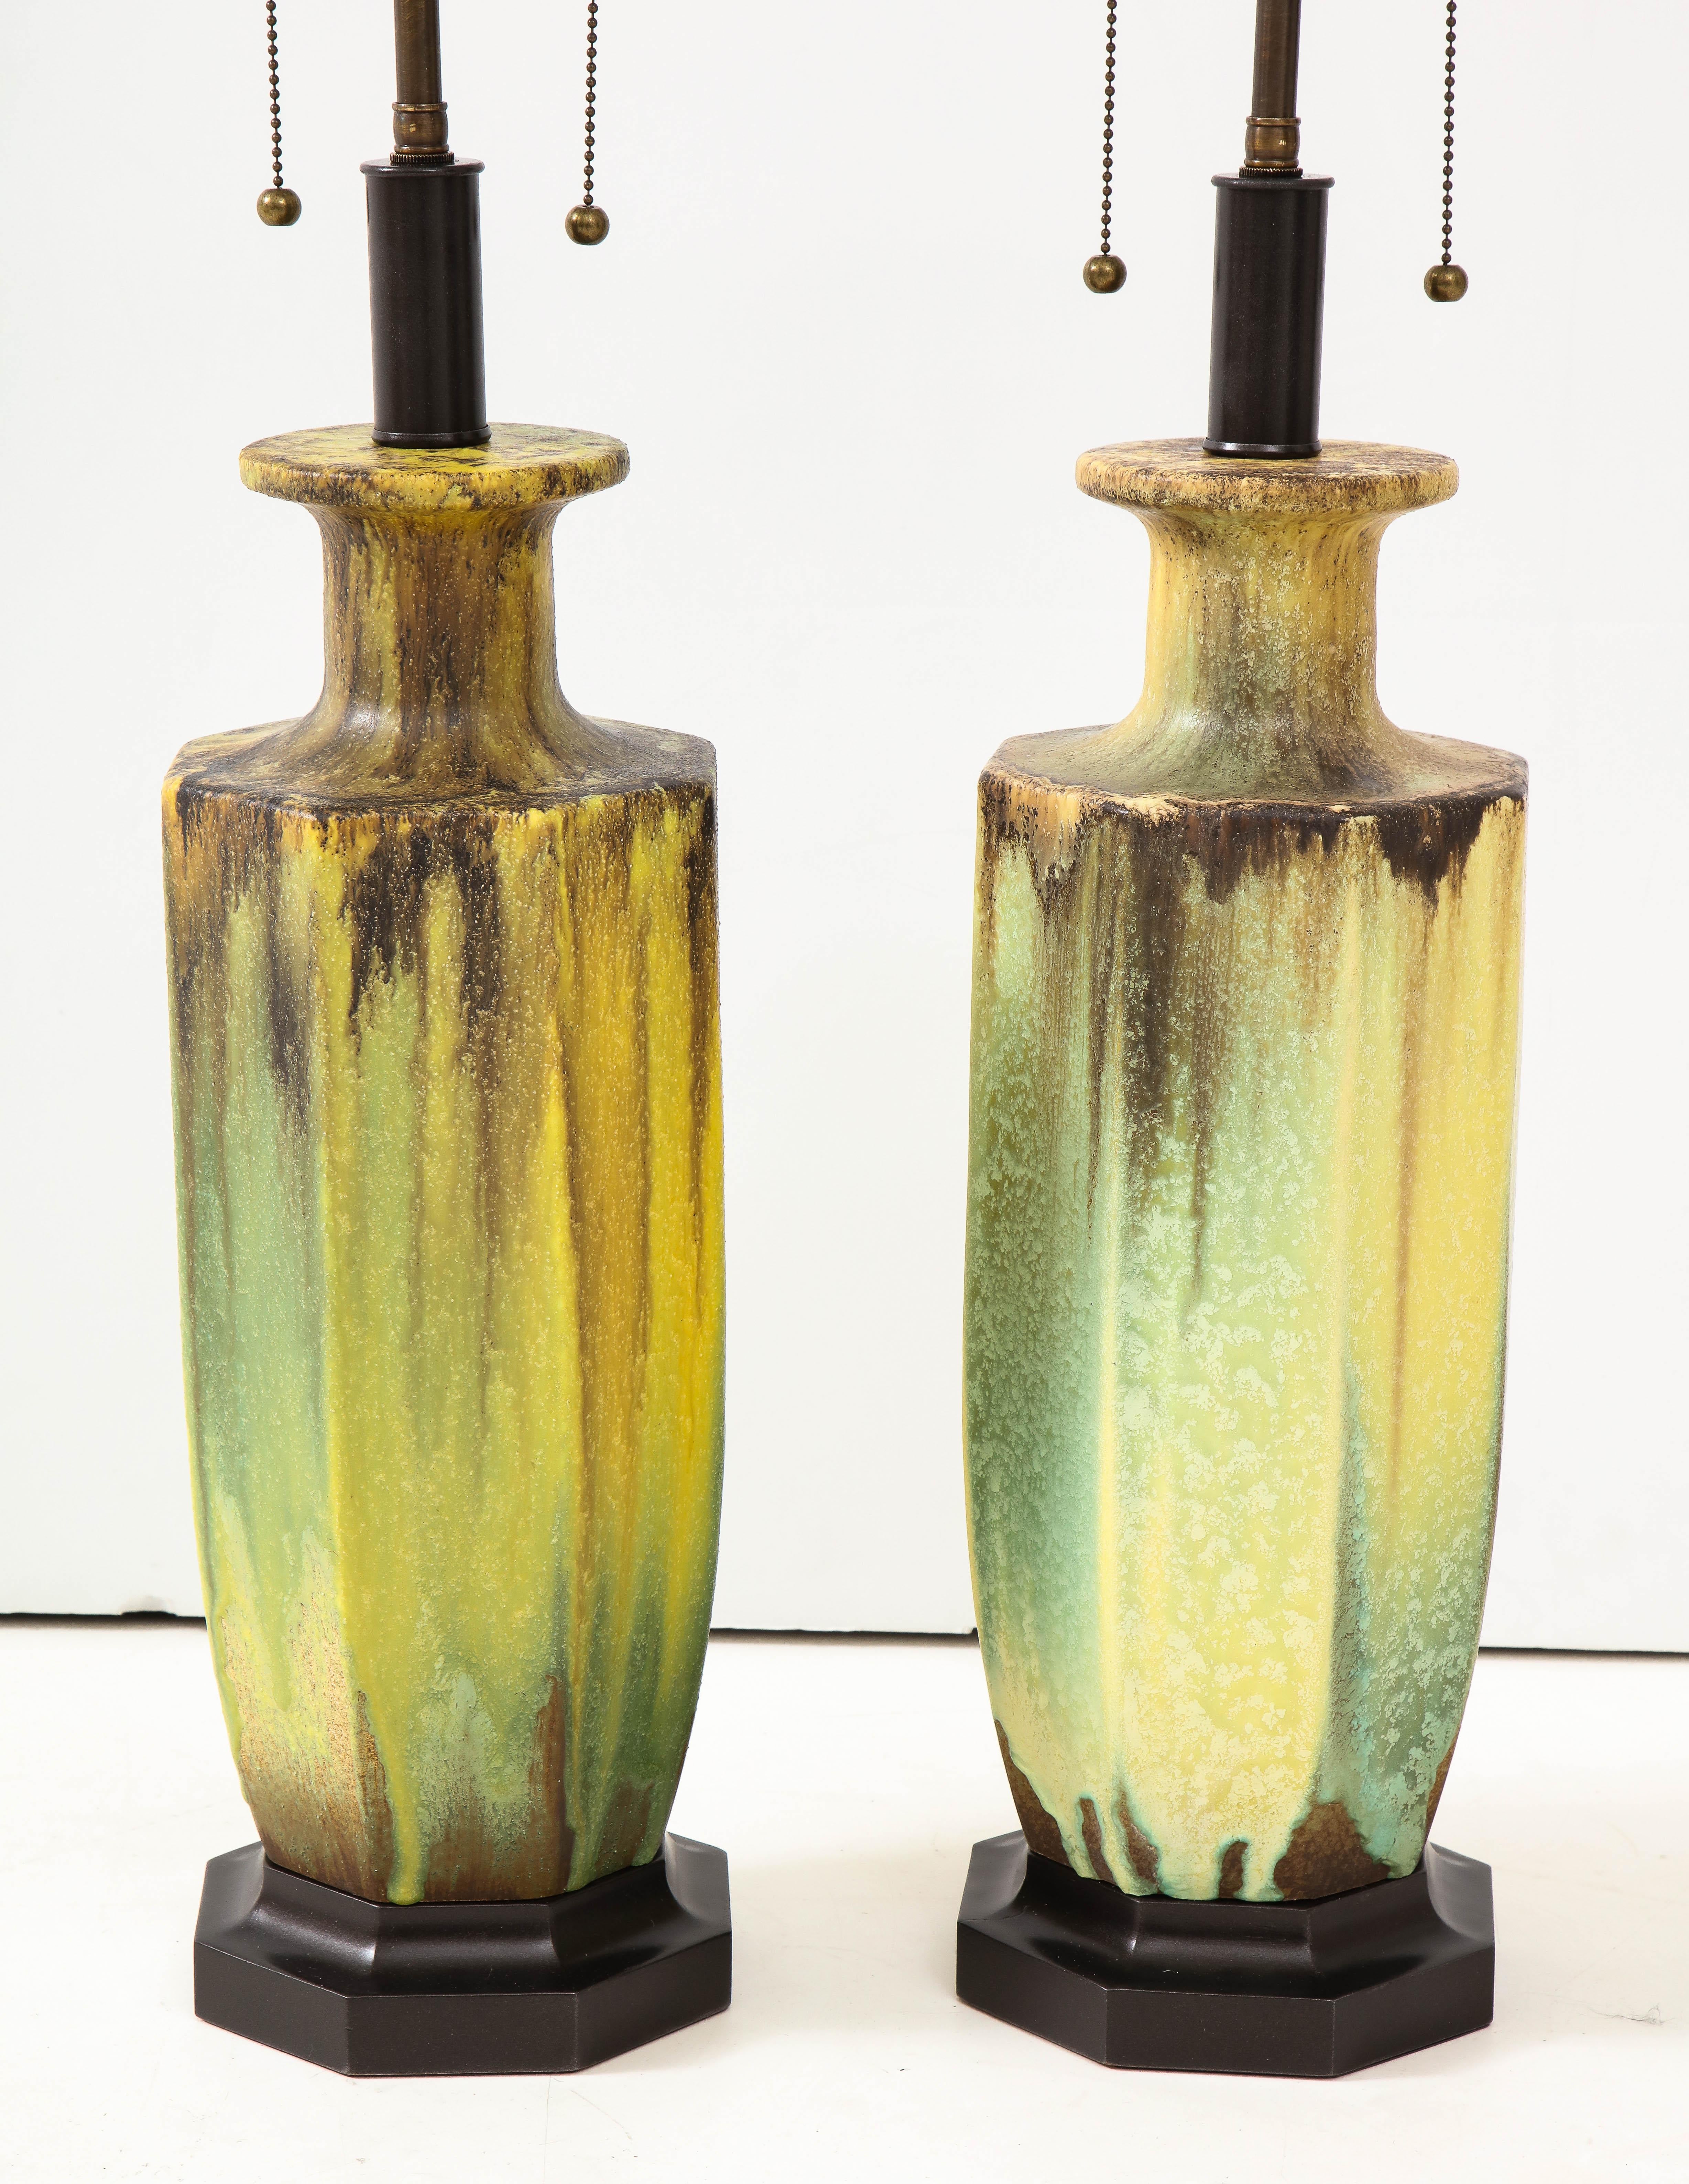 Pair of 1950s glazed ceramic lamps in the Arts & Crafts style.
The lamps have a beautiful glazed finish and they are mounted on bronze colored wooden bases.
They have been newly rewired with bronze finished double clusters that take standard size